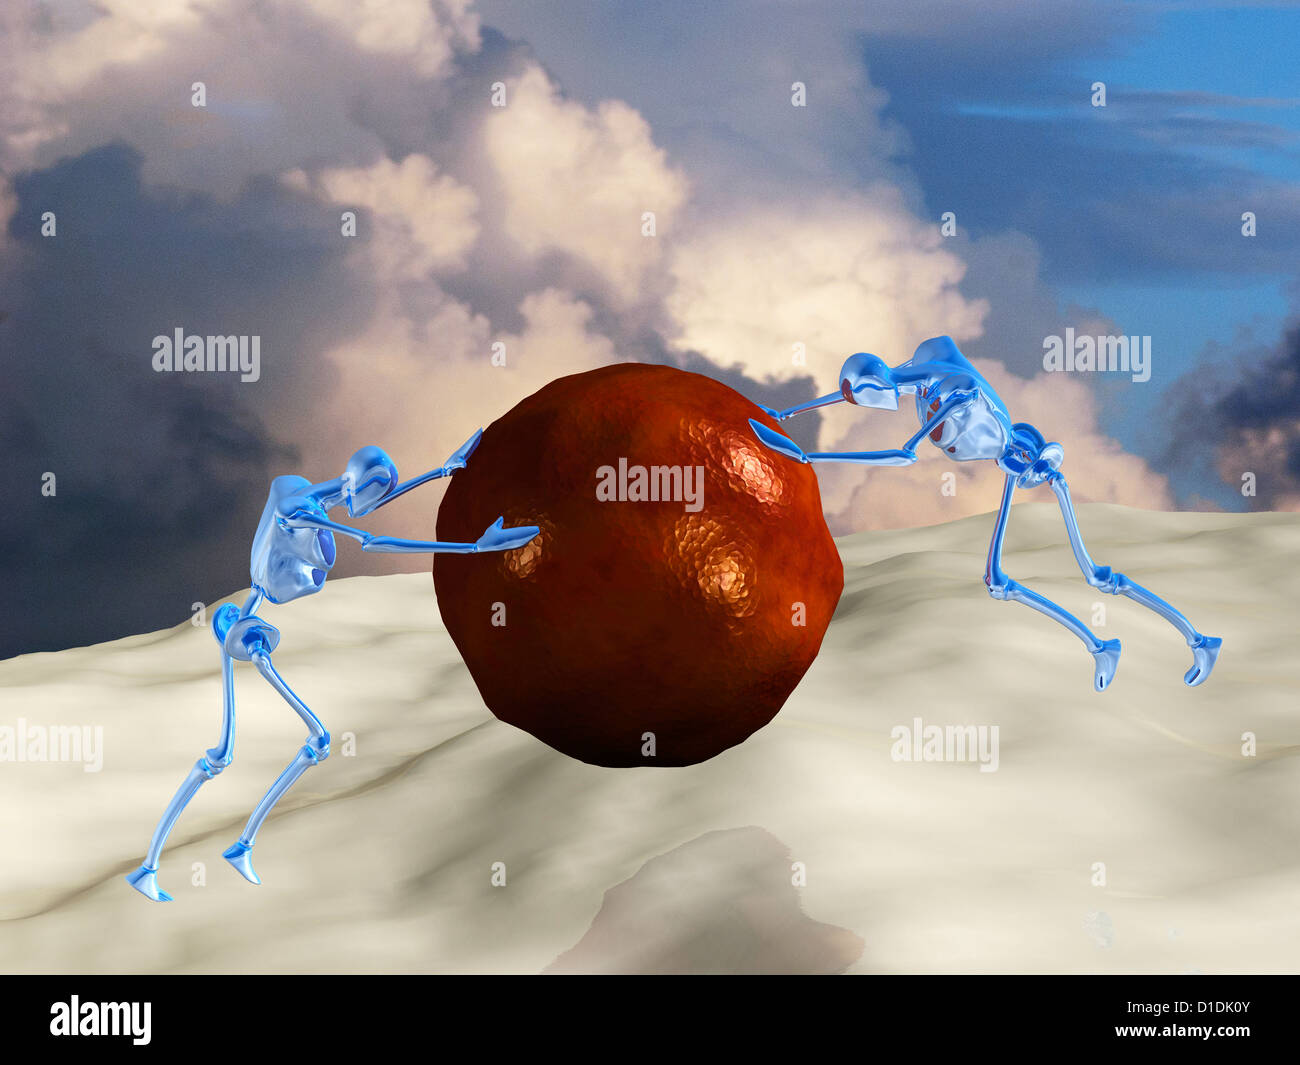 two mannikin figures pushing a ball against one another Stock Photo